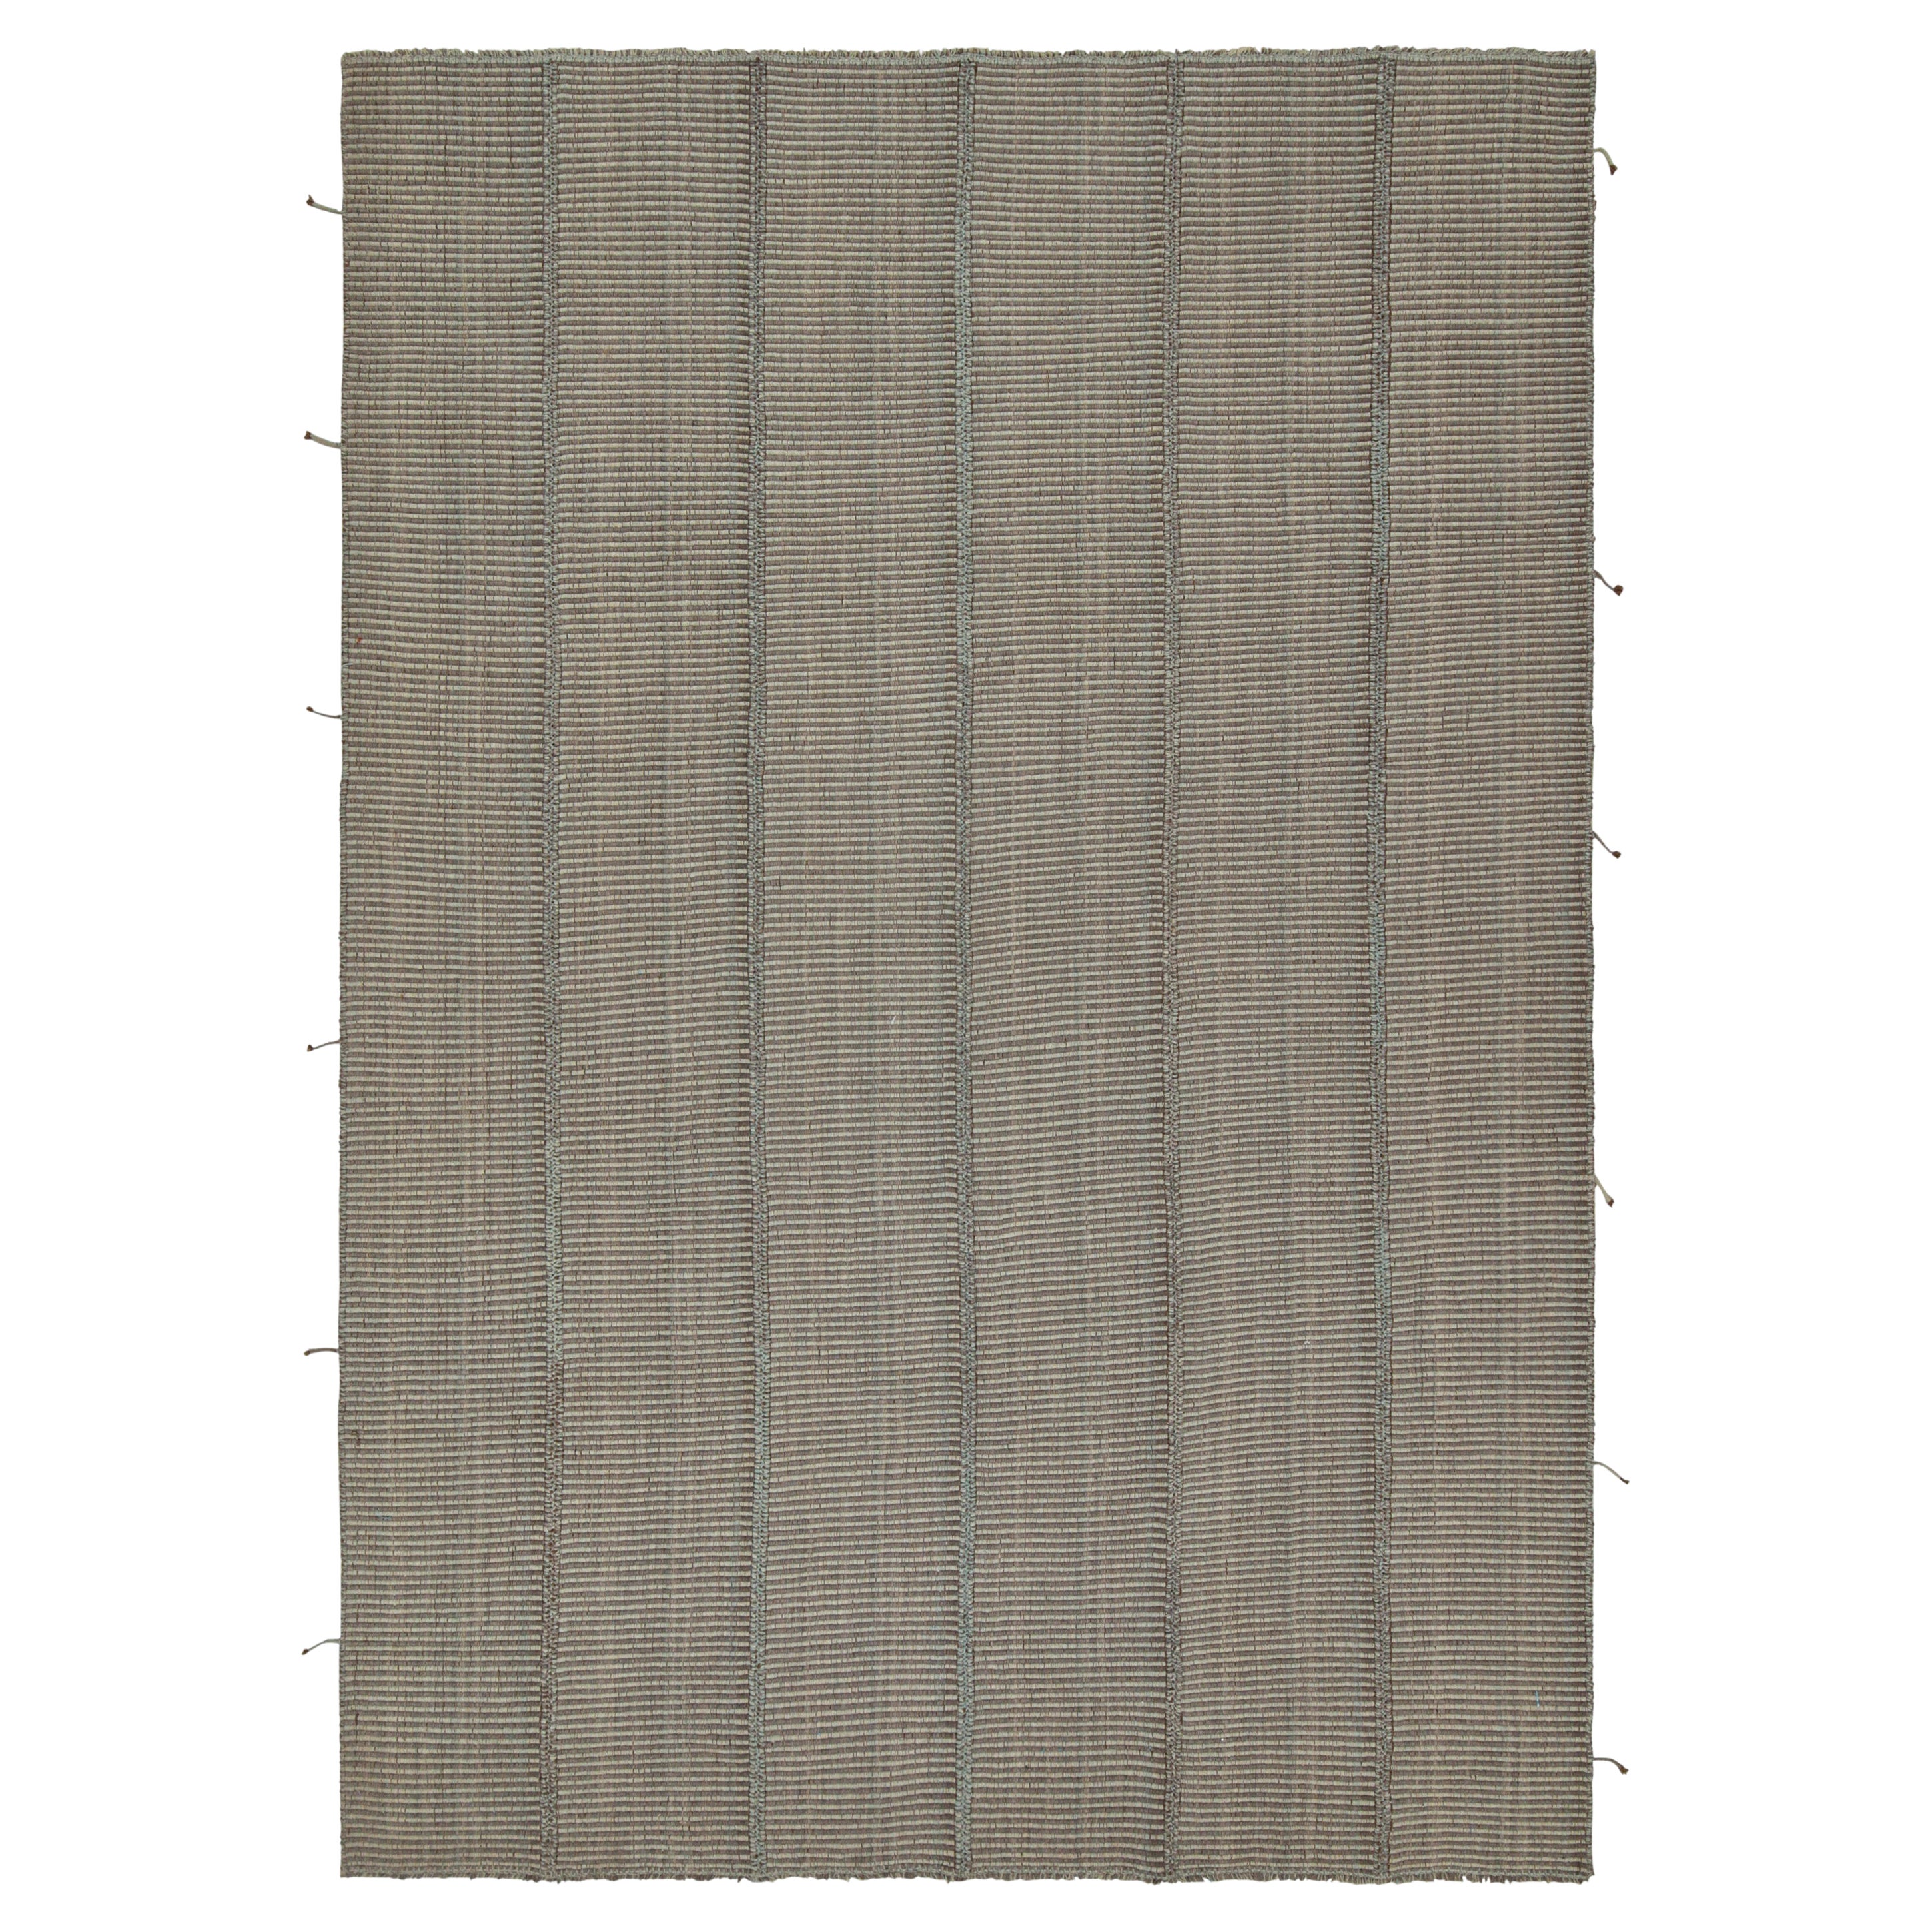 Rug & Kilim’s Contemporary Kilim Rug in Grey and Blue Stripes with Brown Accents